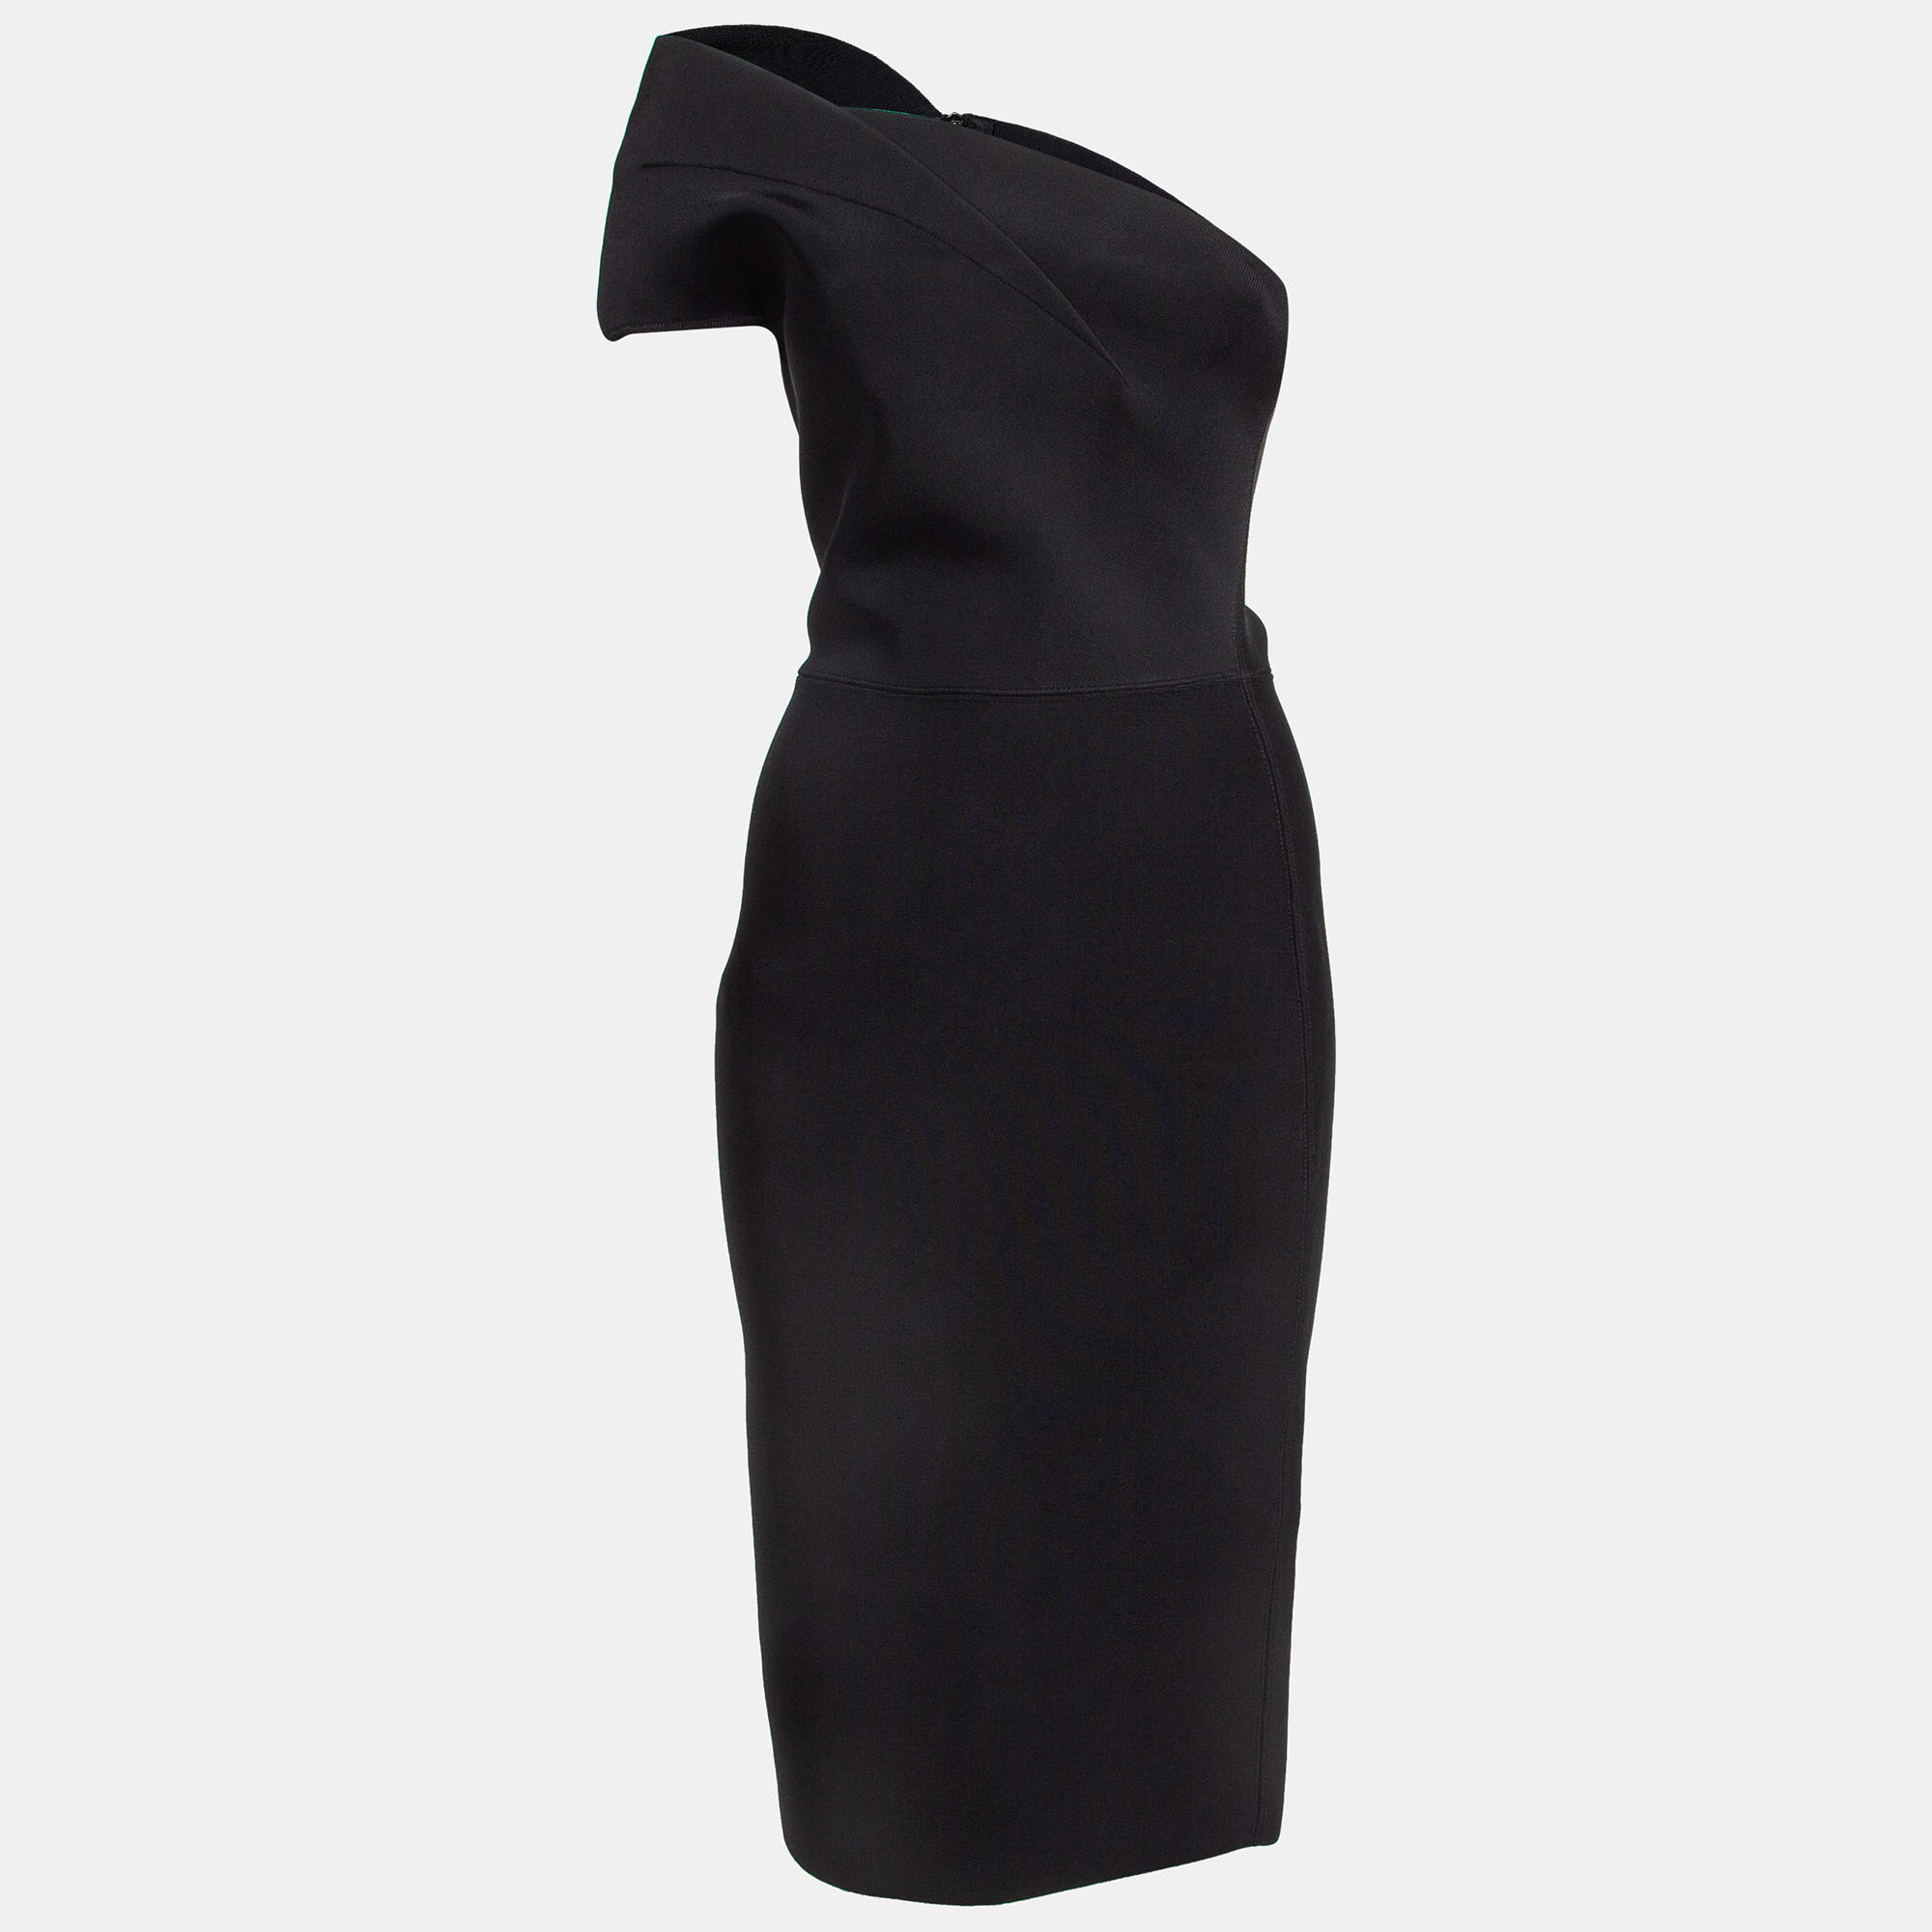 The fine artistry and the feminine silhouette of this Roland Mouret dress exhibit the labels impeccable craftsmanship in tailoring. It is stitched using quality materials has a good fit and can be easily styled with chic accessories open toe sandals and sling bags.